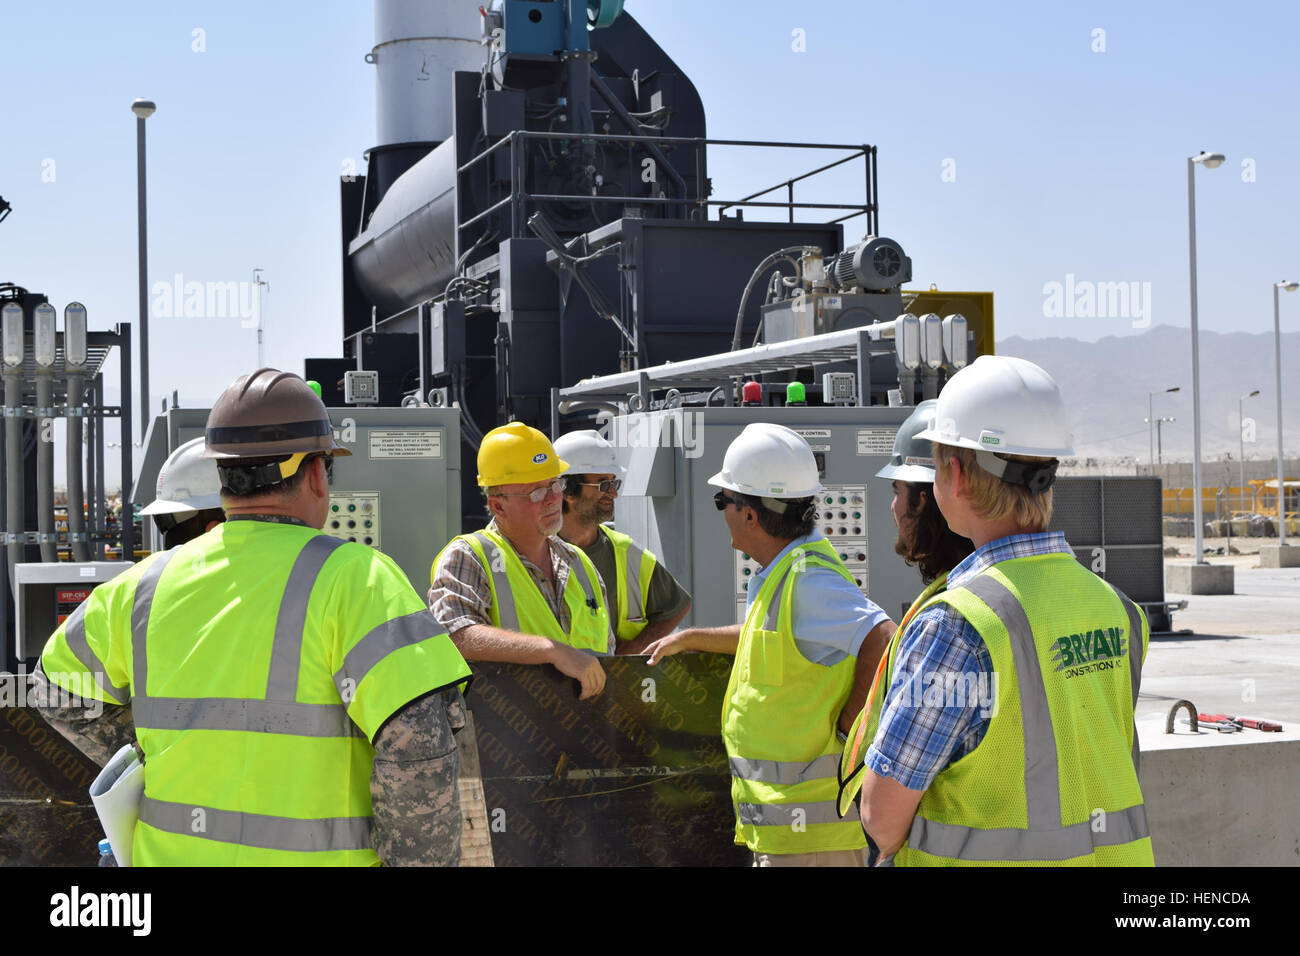 Mr. Christopher Miranda, project manager for the U.S. Army Corps of Engineers, speaks with construction company personnel in front of a new trash incinerator at the new Waste Management Complex on Bagram Air Field, Afghanistan, July 16, 2014. This incinerator is one of six at the facility. (DoD photo by U.S. Army Maj. Devon McRainey/Released) New Waste Management Complex at Bagram Air Field 140716-A-XY287-002 Stock Photo